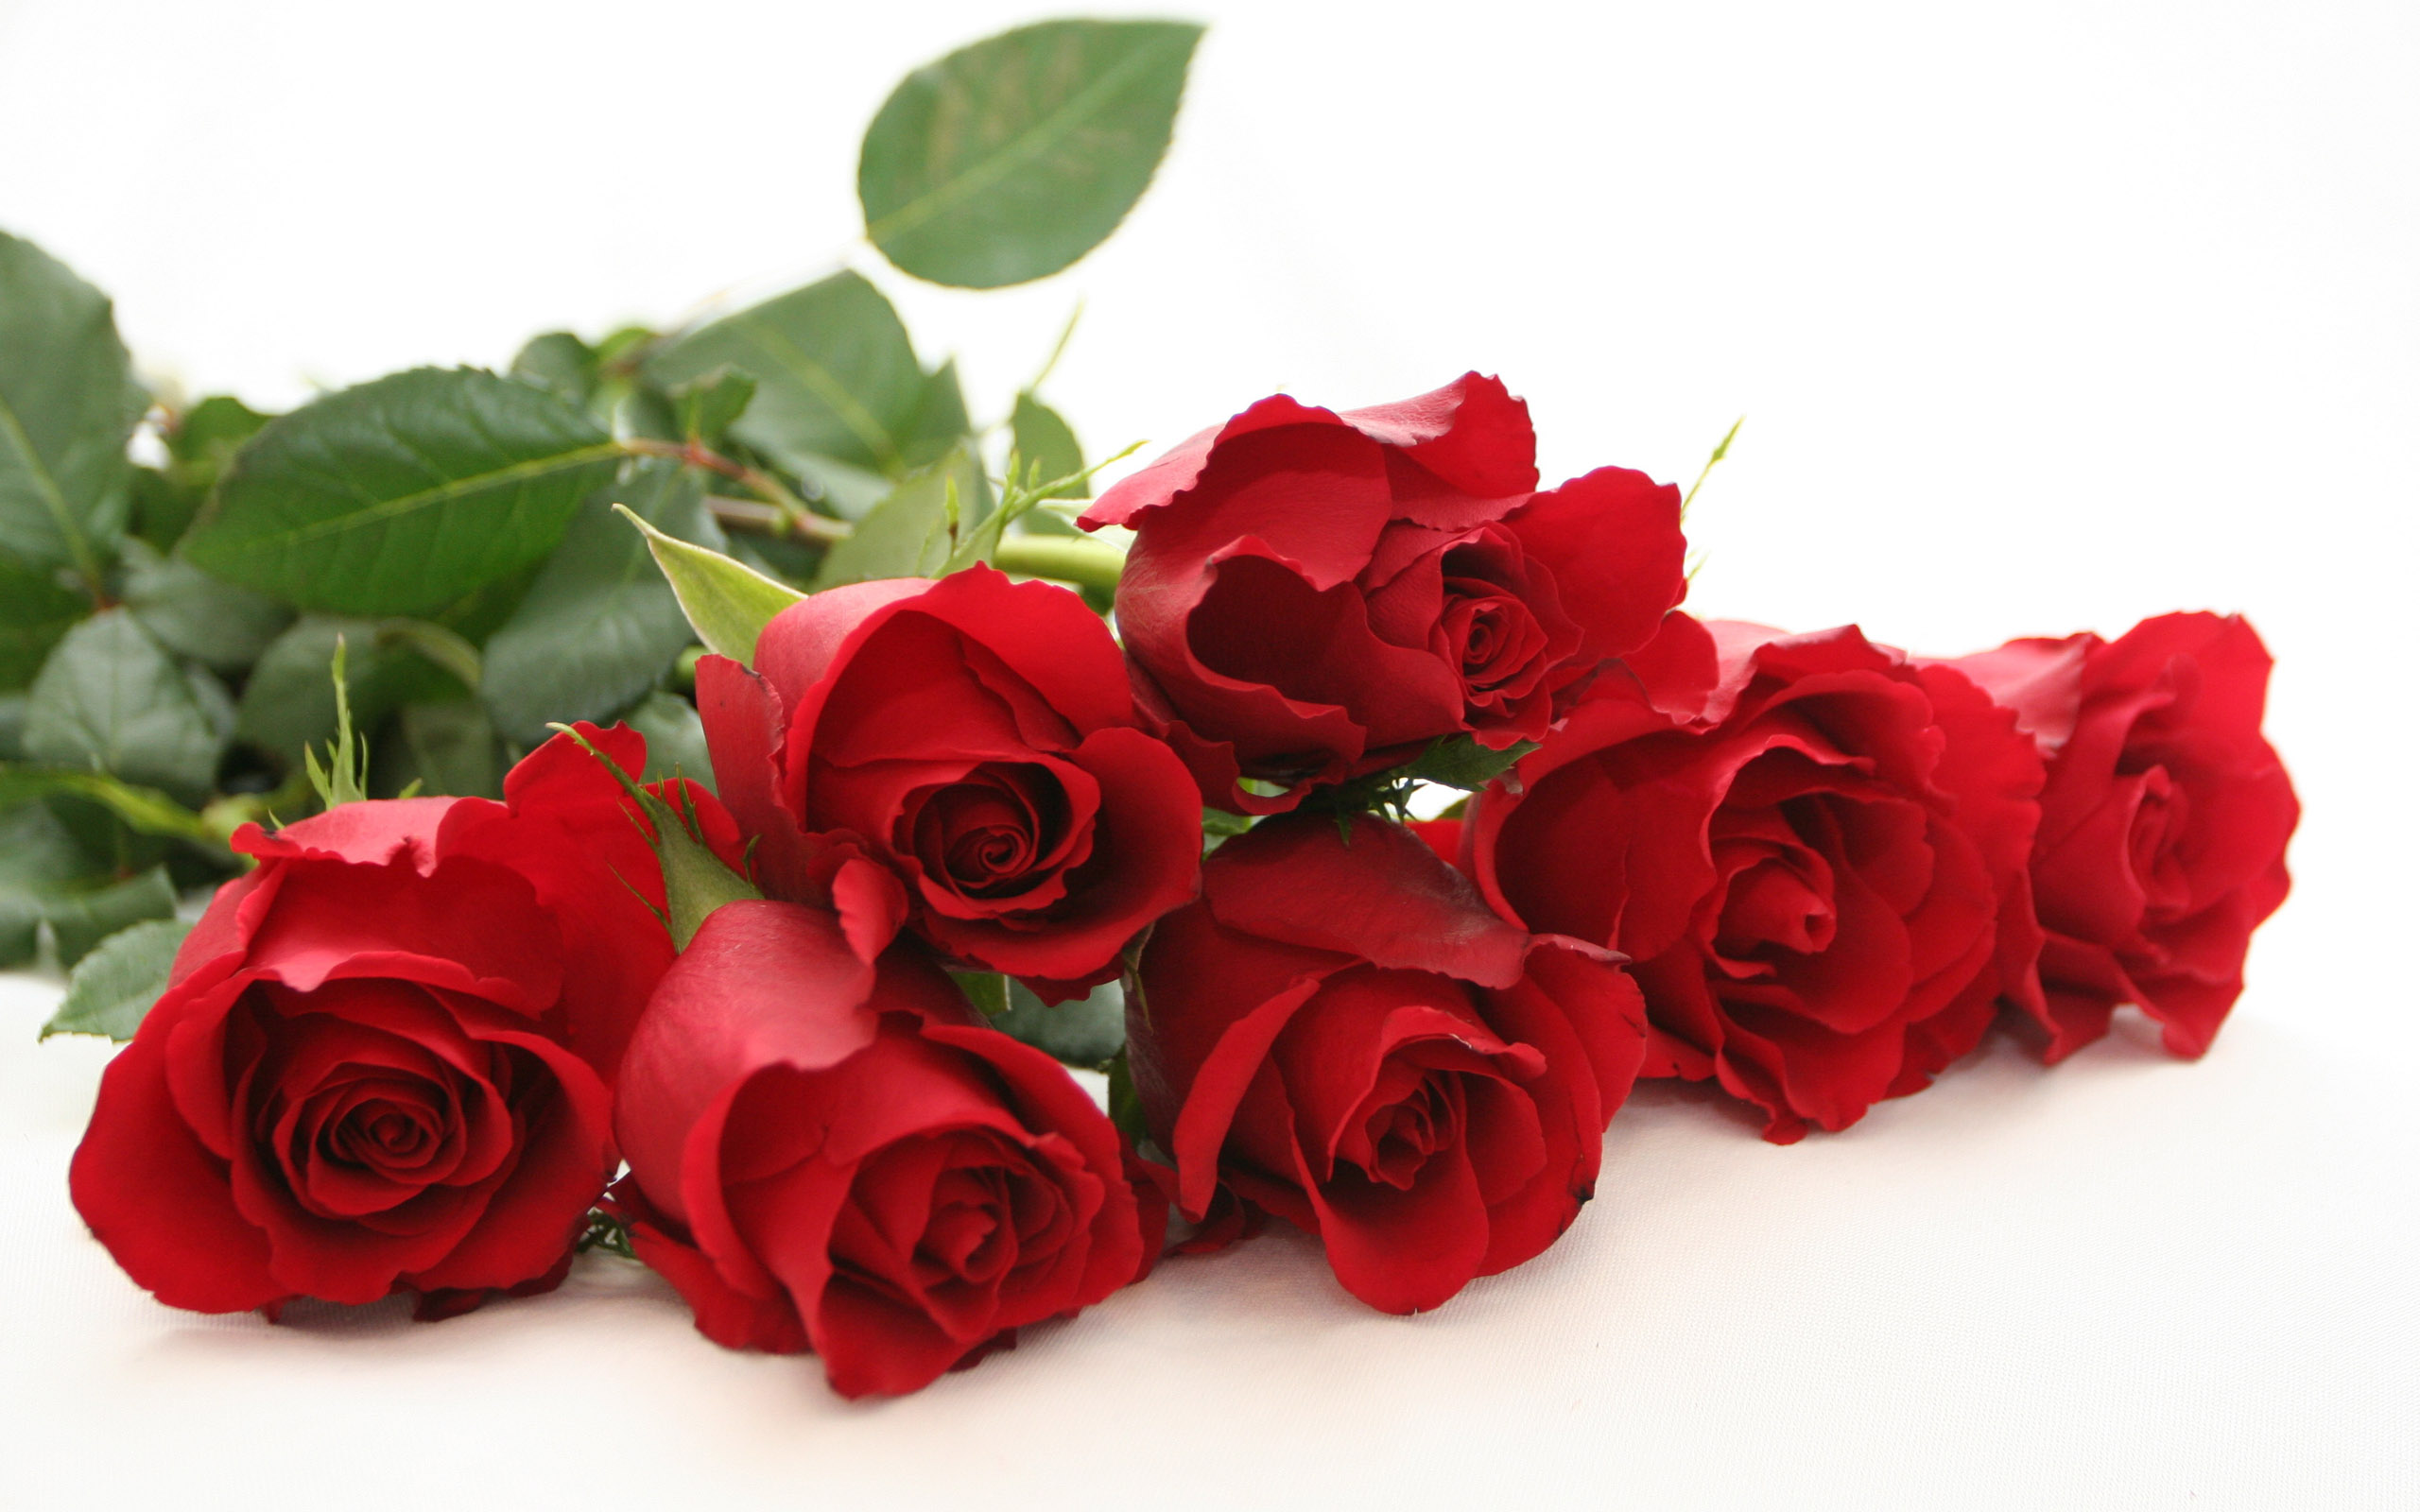 Plant a rose bush for your Valentine